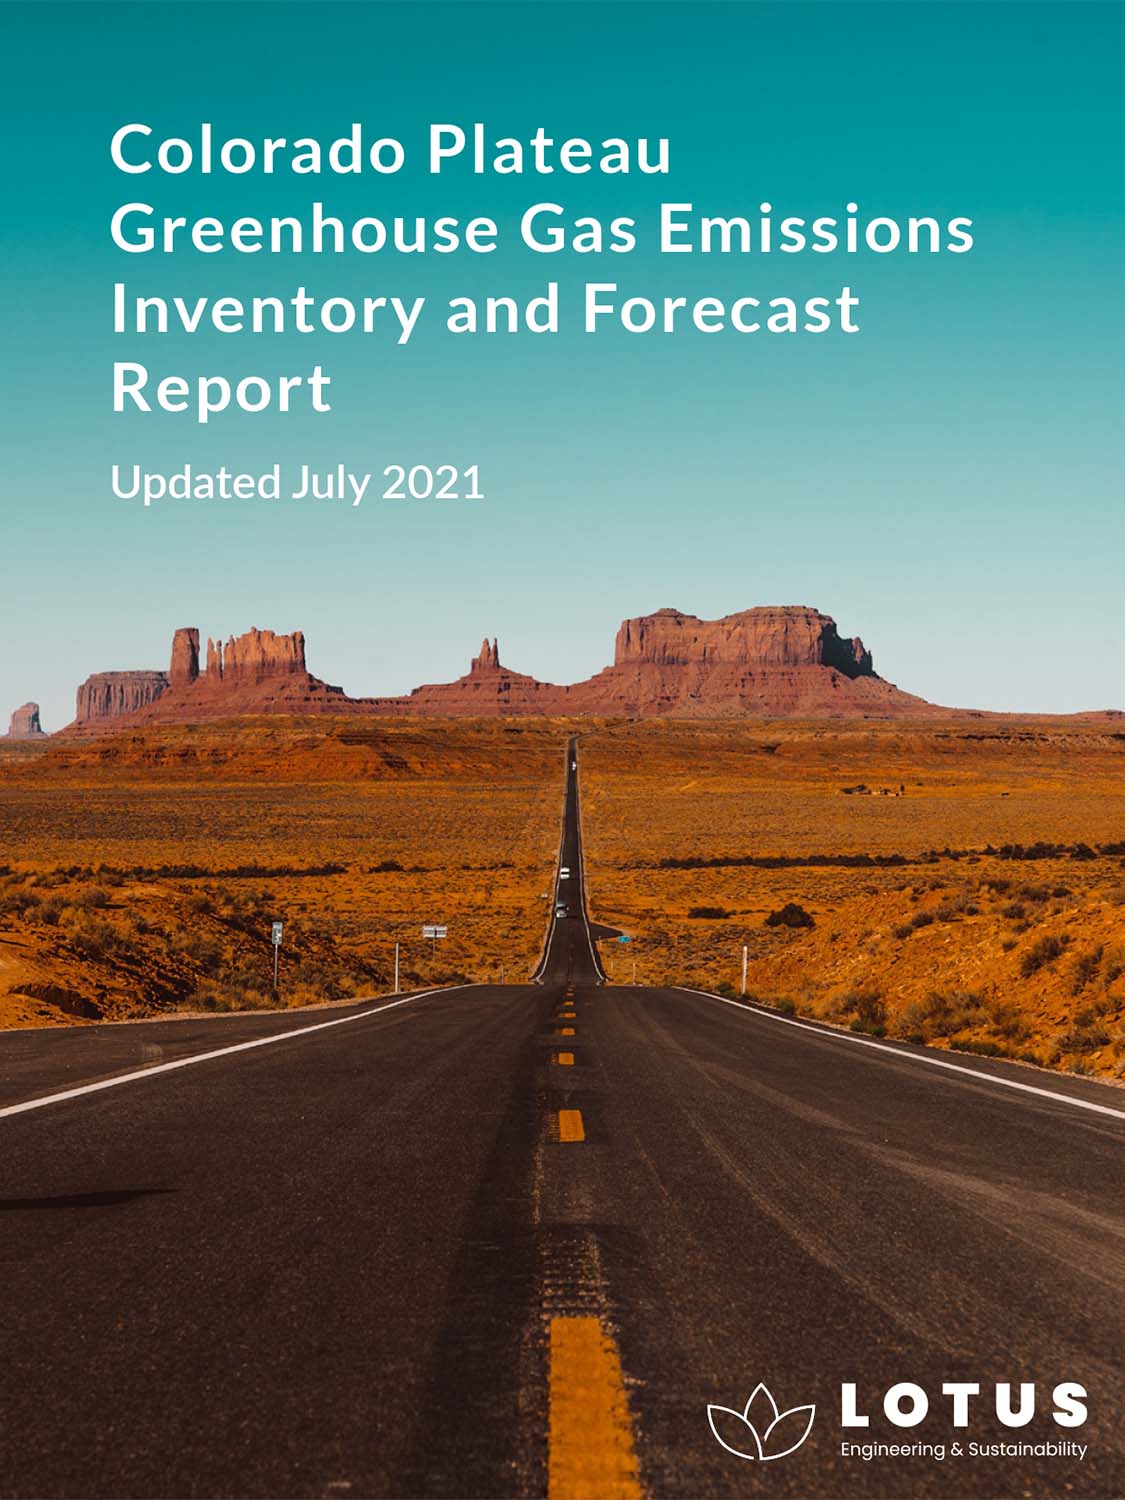 Greenhouse Gas Emissions Inventory Report